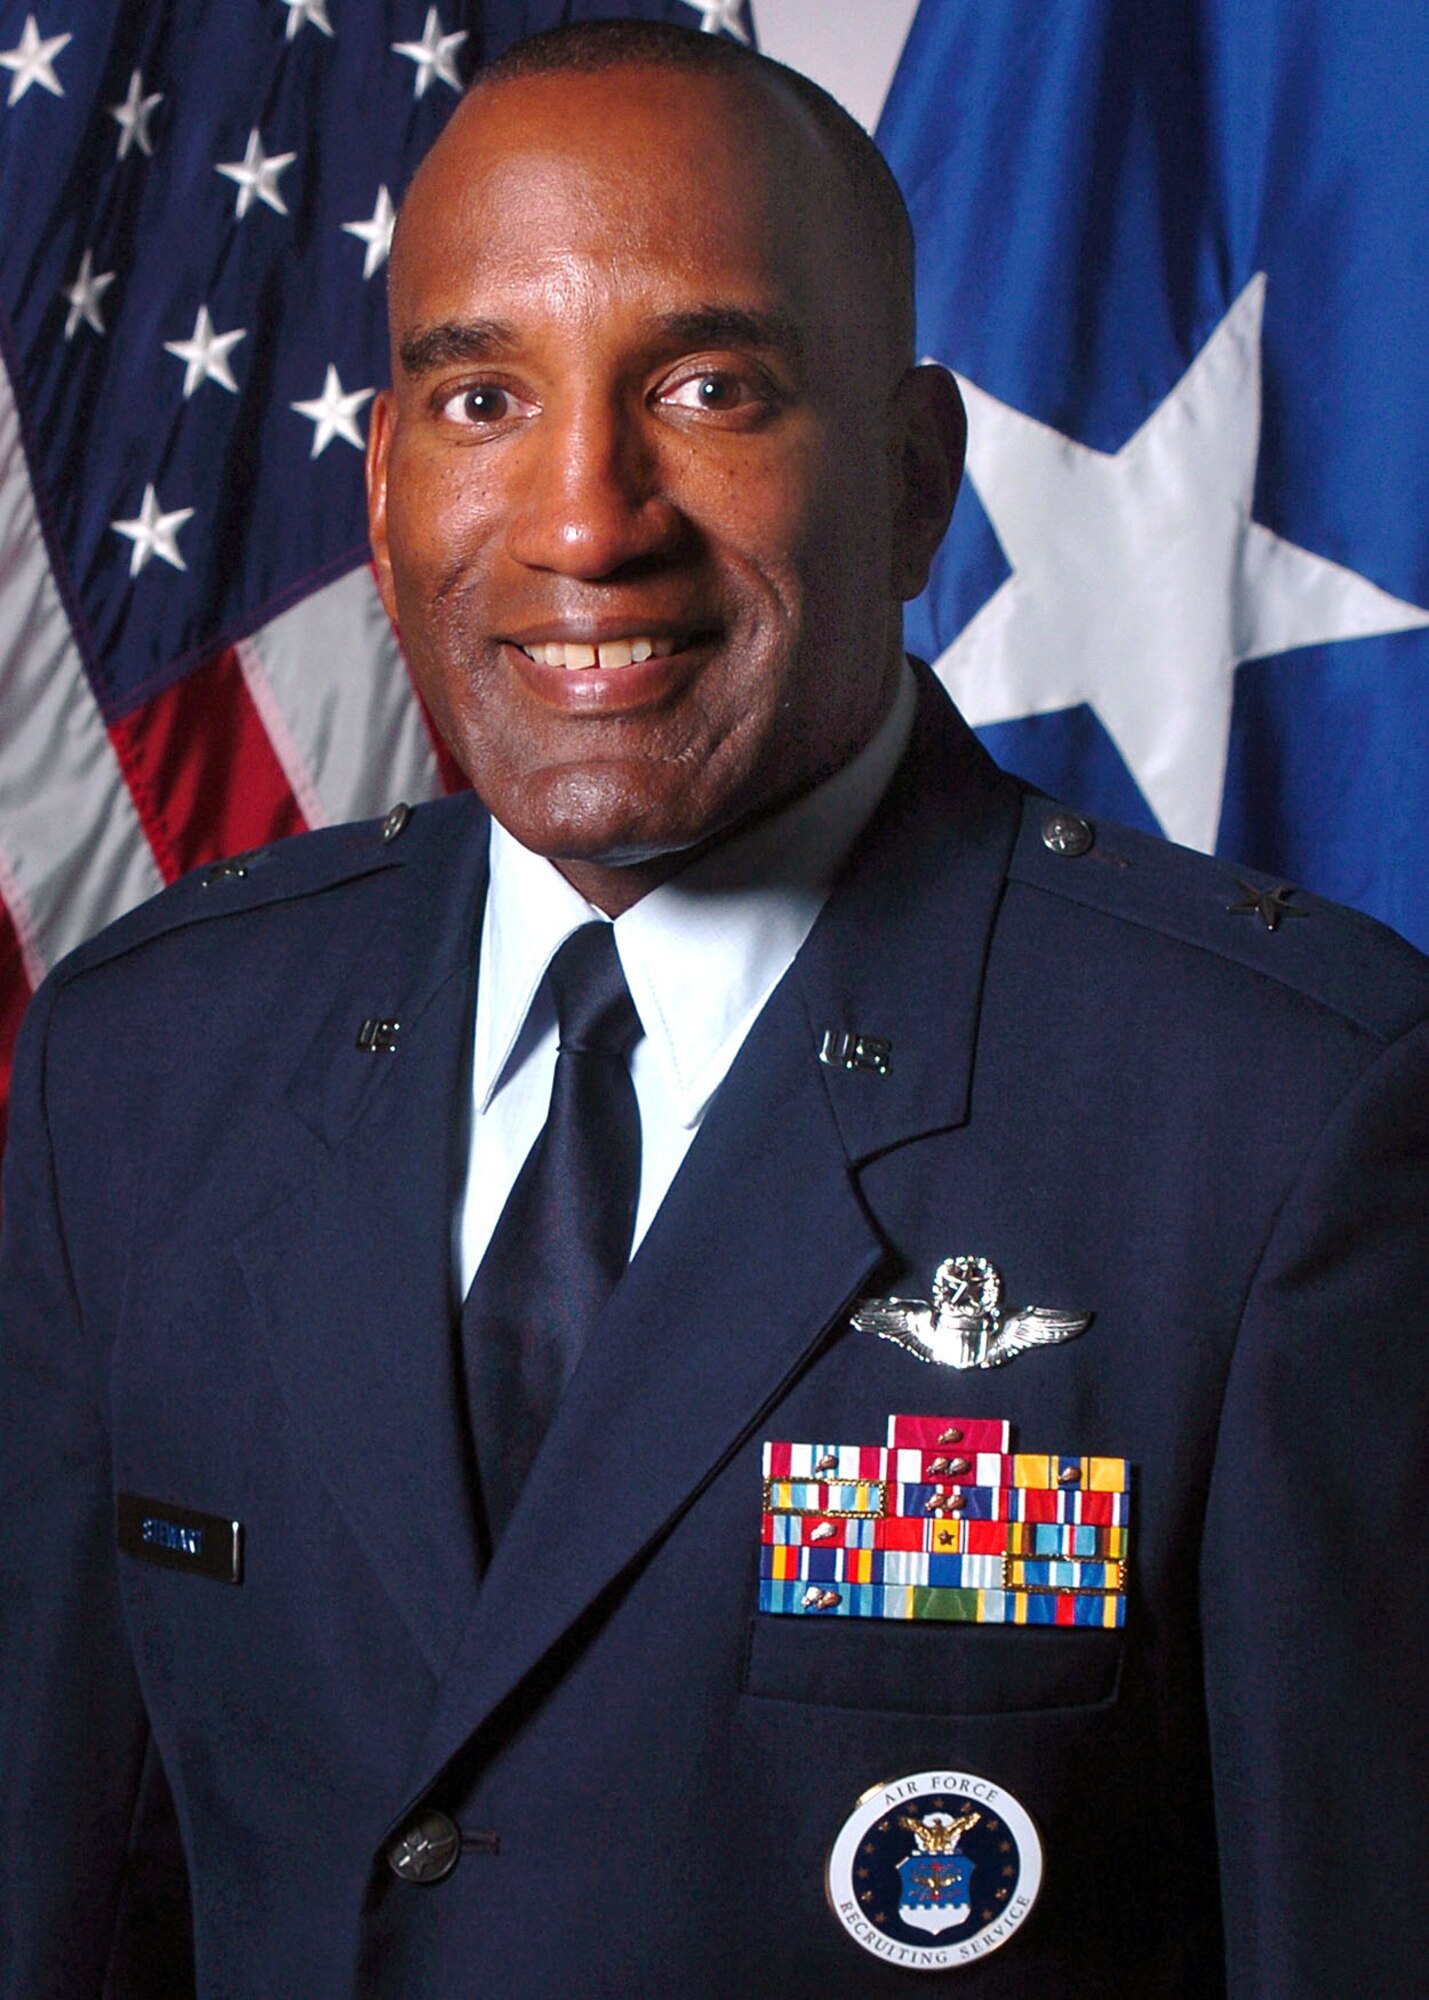 Brig. Gen. A.J. Stewart assumed command of Air Force Recruiting Service headquarters, Randolph Air Force Base, Texas, June 2, 2008. As AFRS commander, General Stewart is responsible for accessing qualified men and women to meet the personnel procurement requirements of the Air Force. (U.S. Air Force photo)